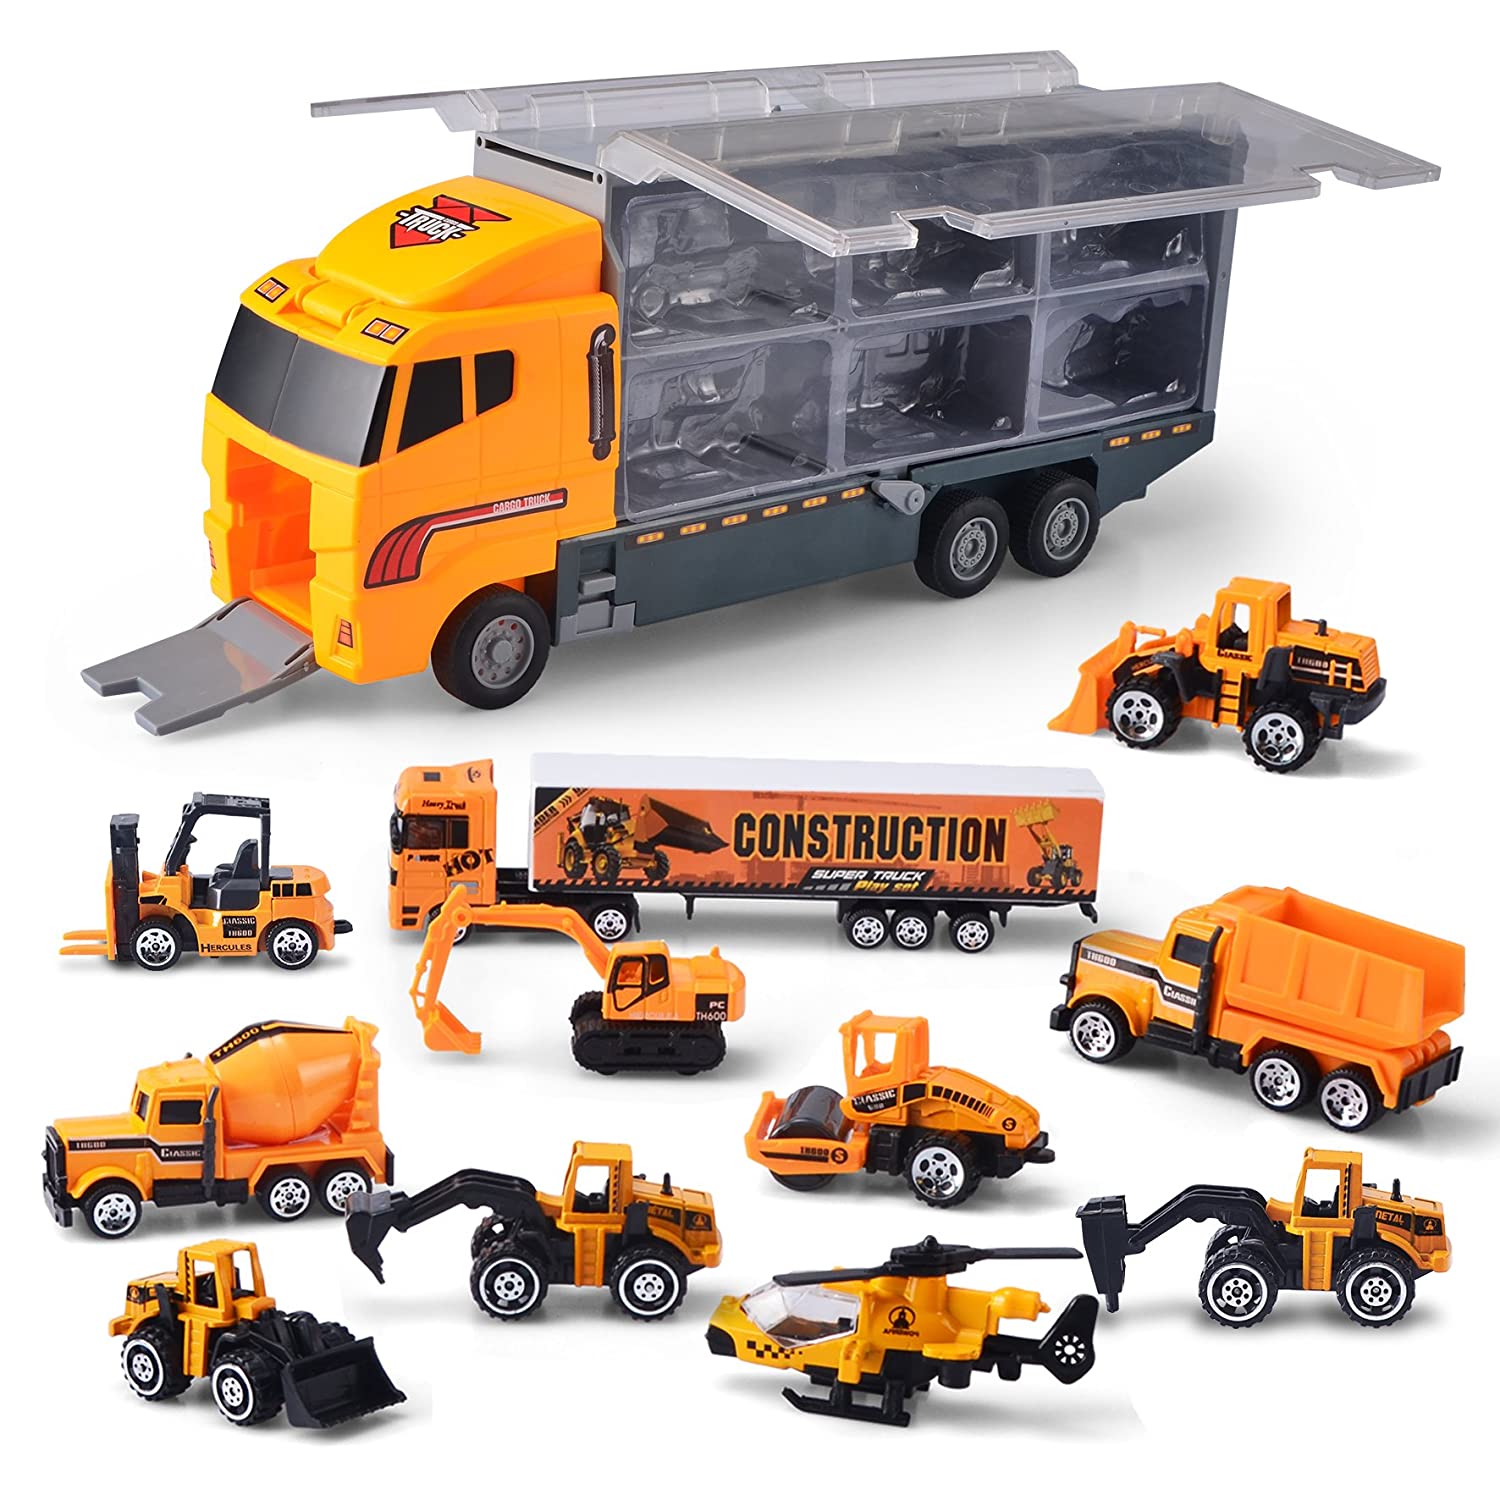 JOYIN 11 in 1 Die-cast Construction Truck Vehicle Car Toy Set Play Vehicles in Carrier Truck